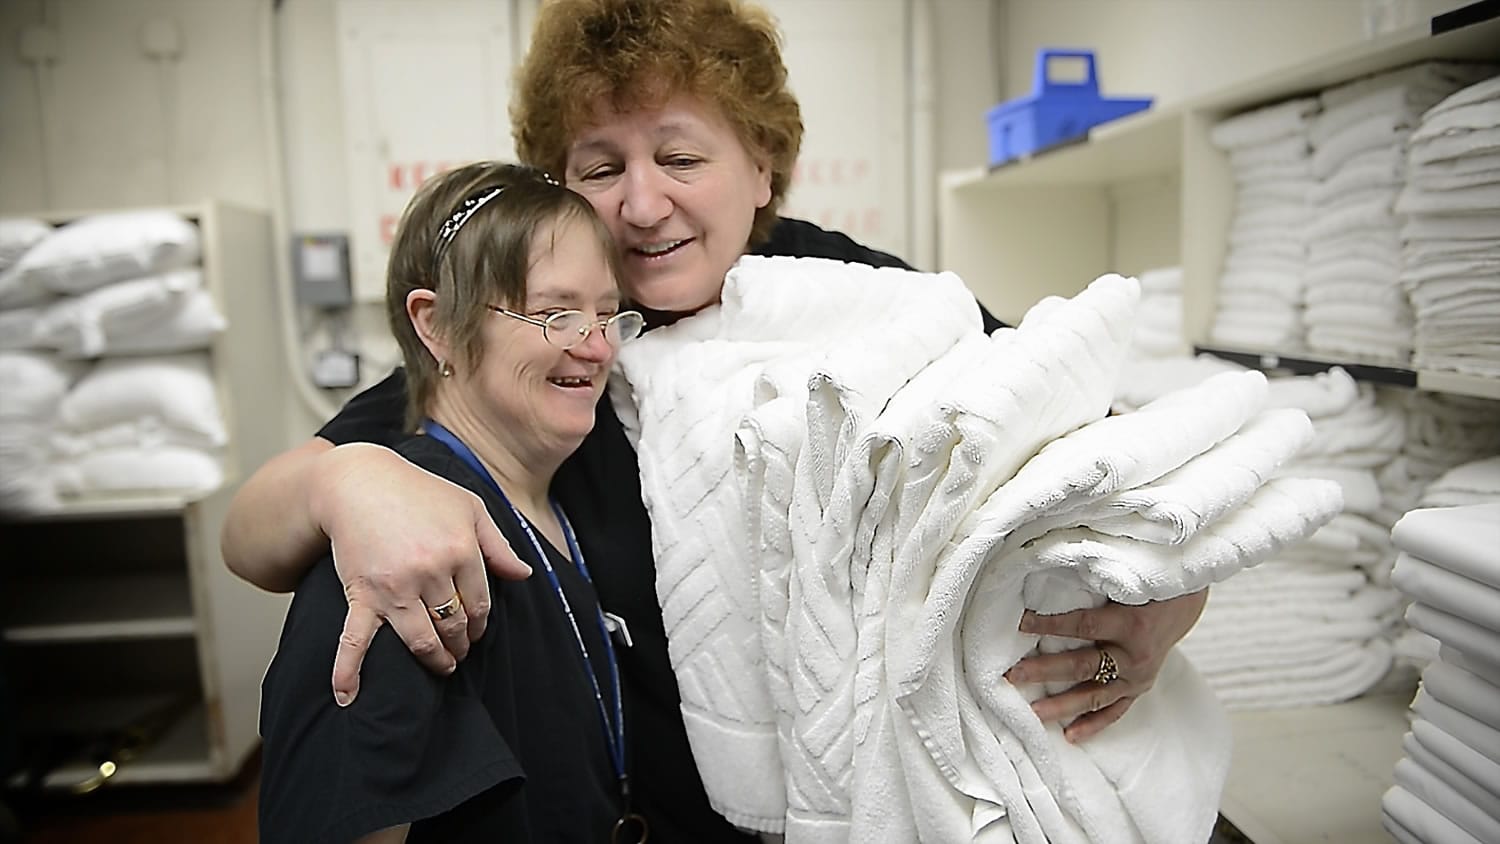 Shelli Fanning, left, shares a hug with supervisor Vera Babiy on Fanning's last day of work at the Red Lion Hotel Vancouver at the Quay. Fanning has Down syndrome but family and professional support helped her succeed at her housekeeping job for 23 years.